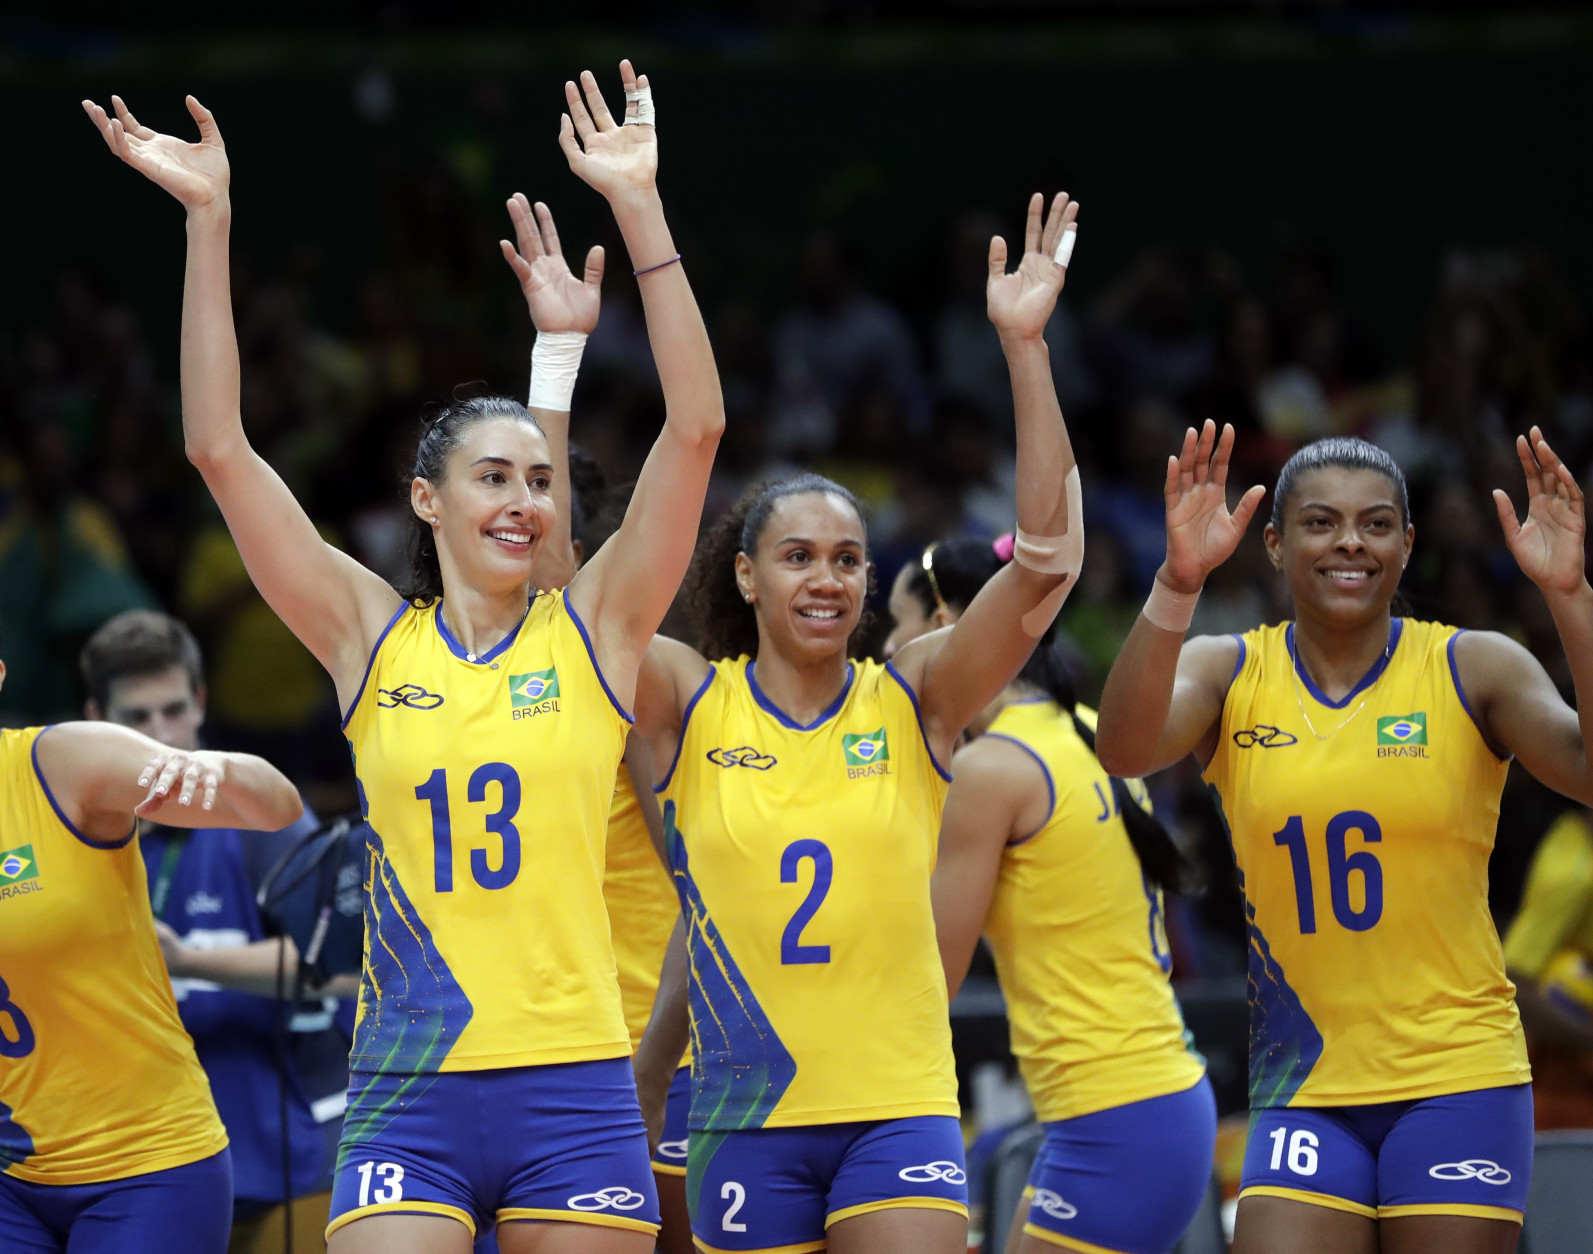 Team Brazil's Sheilla Castro de Paula Blassioli (13), Juciely Cristina Barreto (2) and Fernanda Rodrigues (16) wave to fans after defeating Argentina in a women's preliminary volleyball match at the 2016 Summer Olympics in Rio de Janeiro, Brazil, Tuesday, Aug. 9, 2016. (AP Photo/Jeff Roberson)